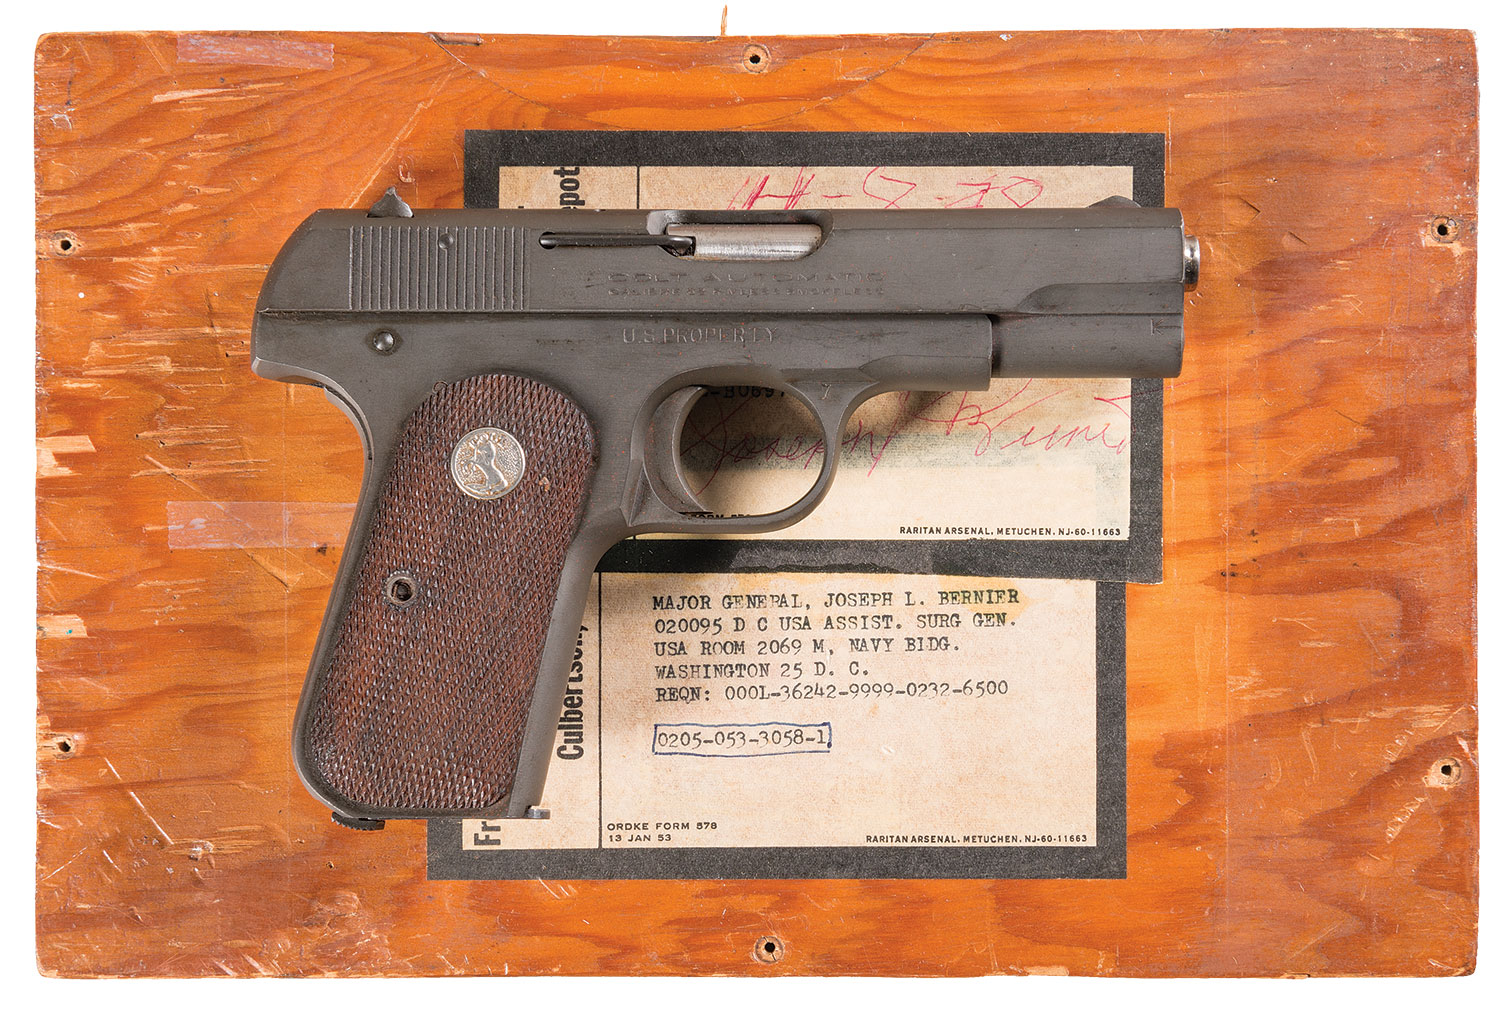 Lot 3593: Historic Documented U.S. Property Marked Colt Model 1903 Hammerless Semi-Automatic Pistol as Issued to Brigadier General Joseph L. Bernier with Original Wooden Shipping Crate